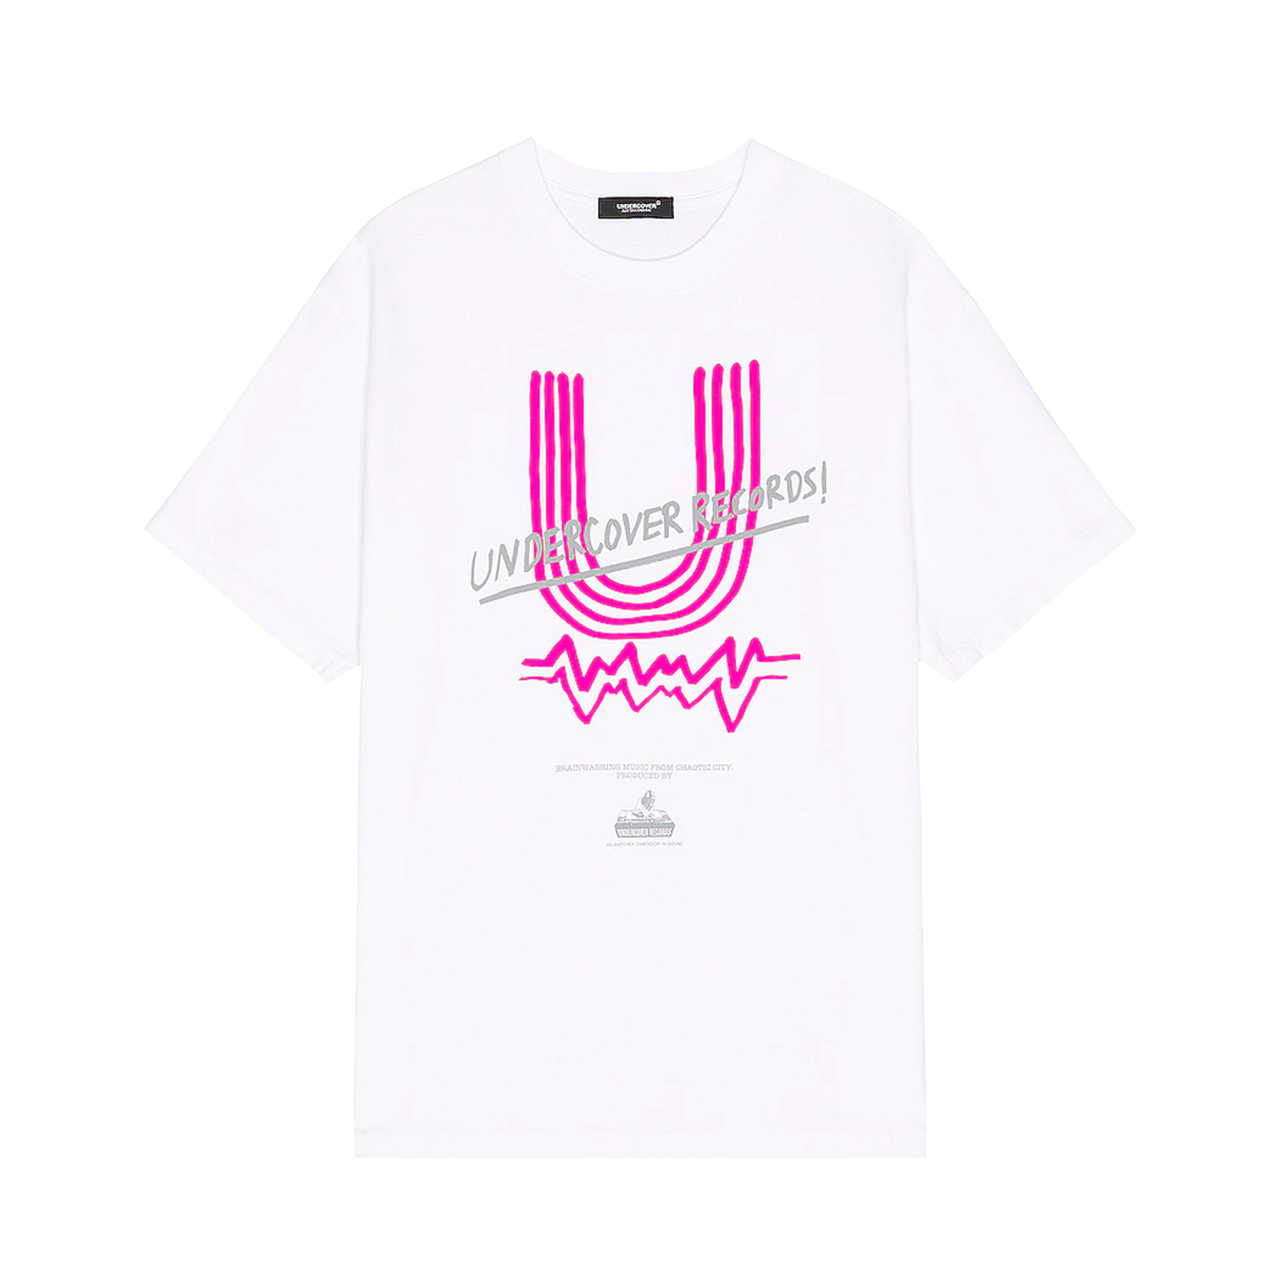 Undercover Records Tee White Pink